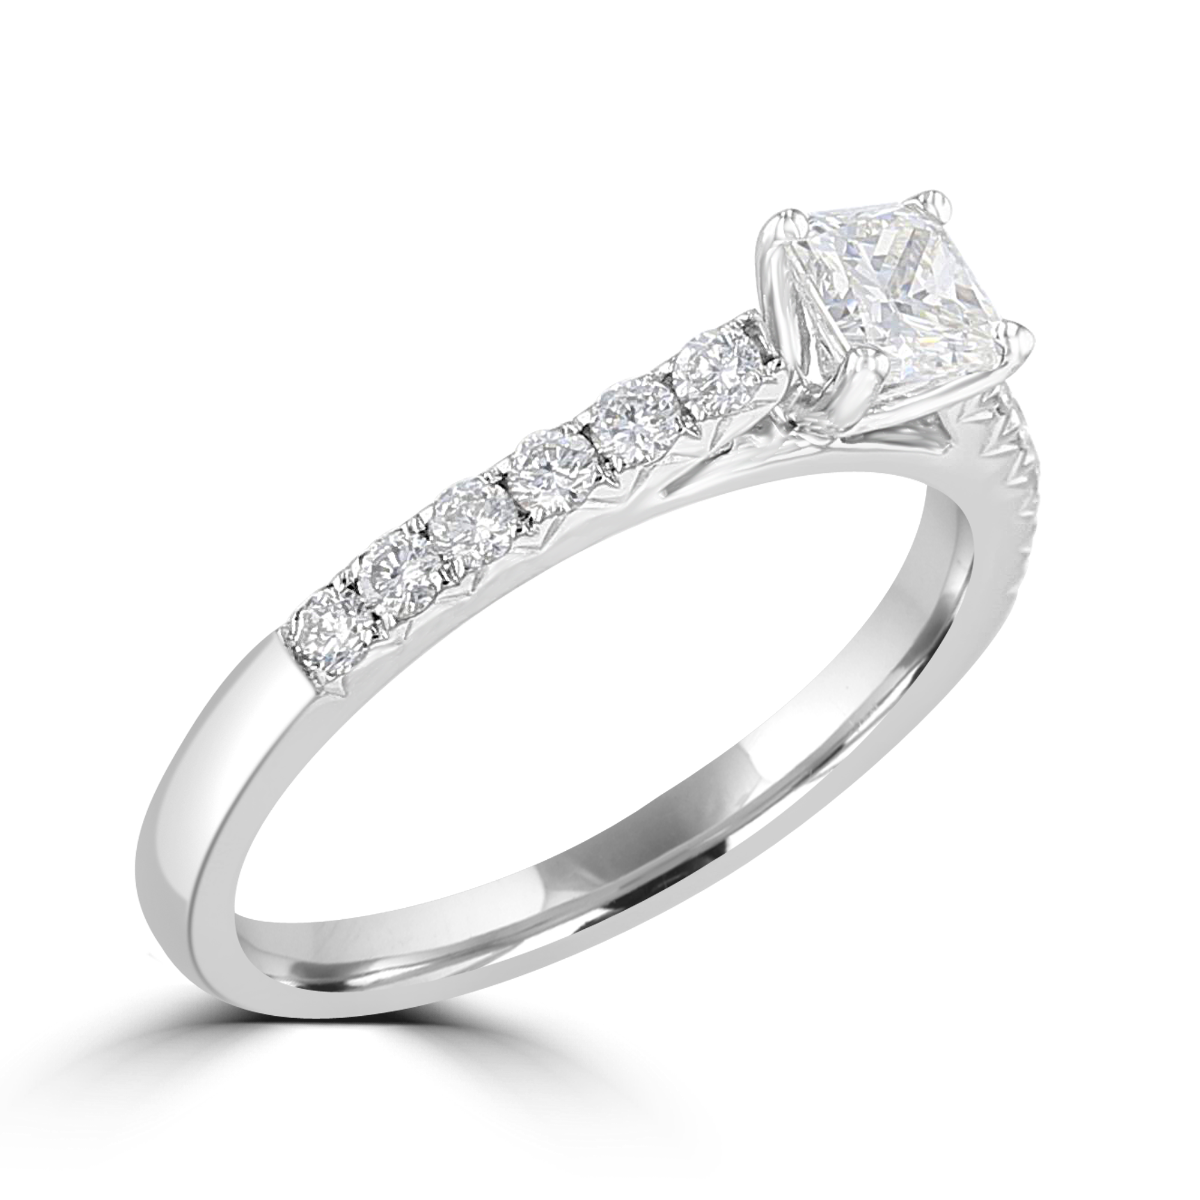 14KT White Gold 3/4 CTW Square Radiant Diamond Cathedral Ring 4,4.5,5,5.5,6,6.5,7,7.5,8,8.5,9